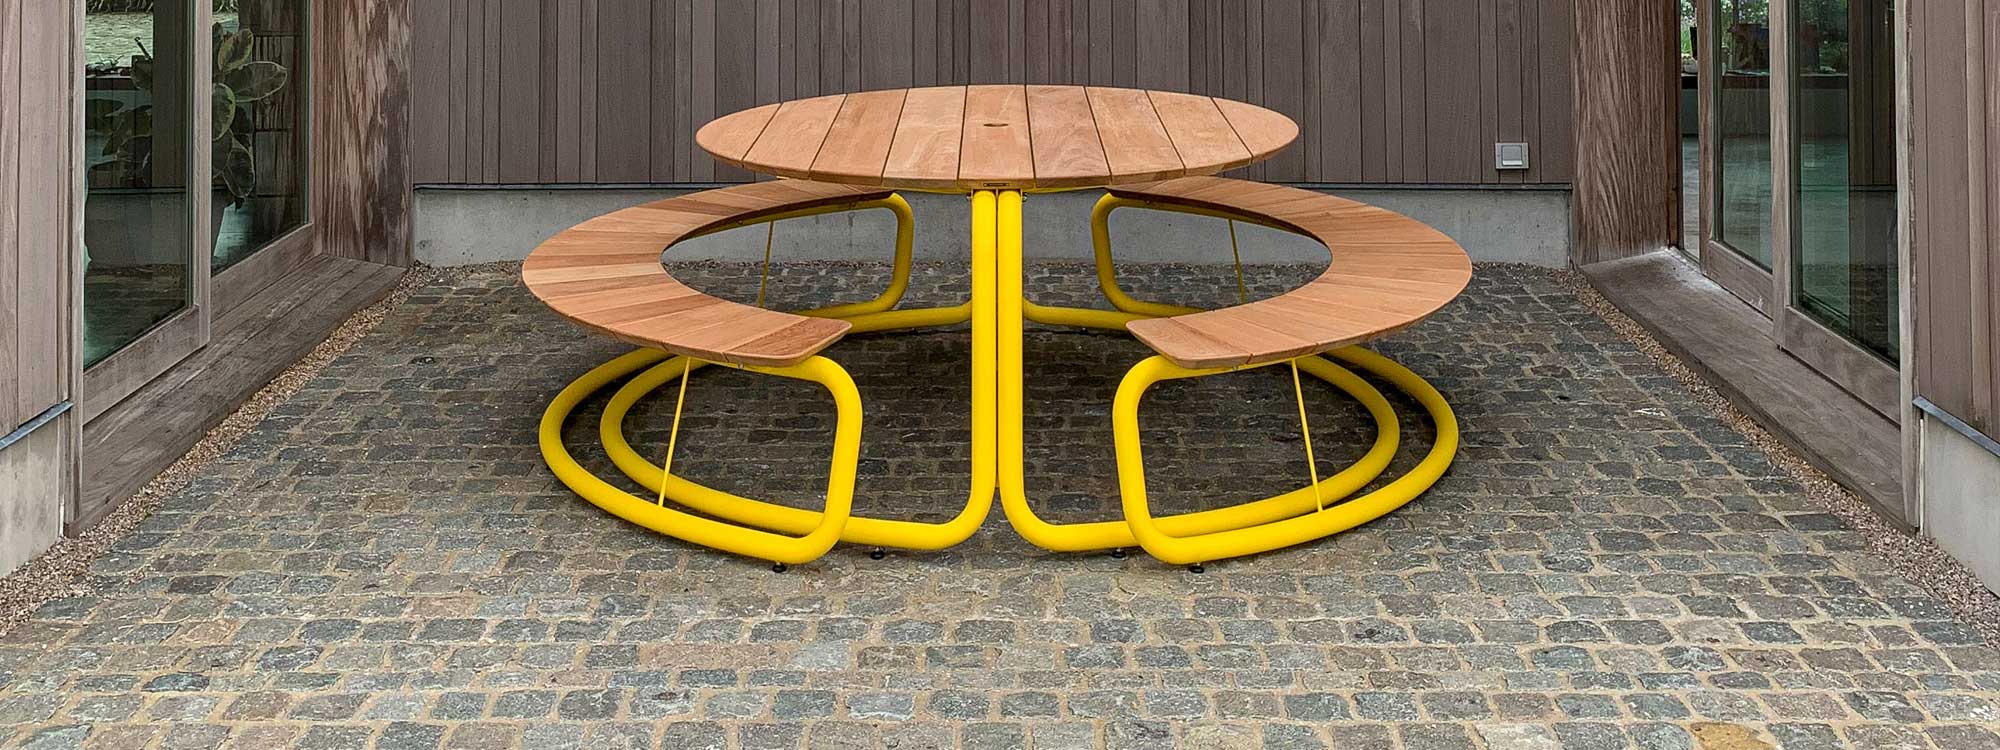 Image of The Circle circular picnic table and benches in yellow tubular steel with surfaces in sustainable afzelia wood by Wünder